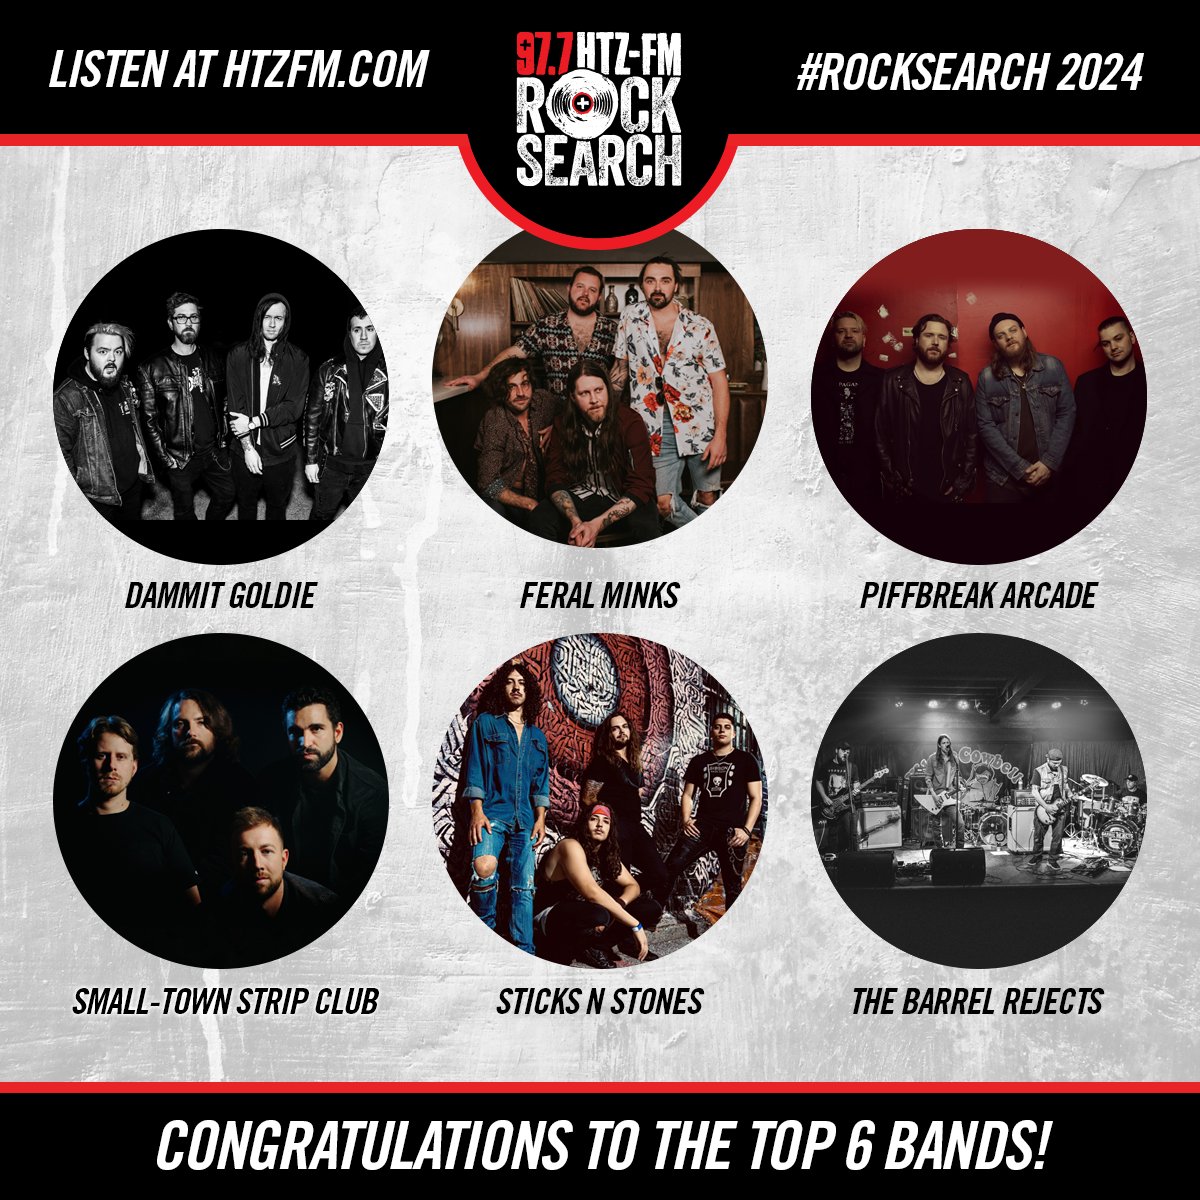 We've calculated the votes... here are the ROCKSEARCH 2024 TOP 6 BANDS! 💥 DammitGoldie Feral Minks Piffbreak Arcade Small-Town Strip Club Sticks N' Stones The Barrel Rejects CONGRATS! 🤘 The top six will go head to head in a live semi-final showcase on May 24th at Warehouse!